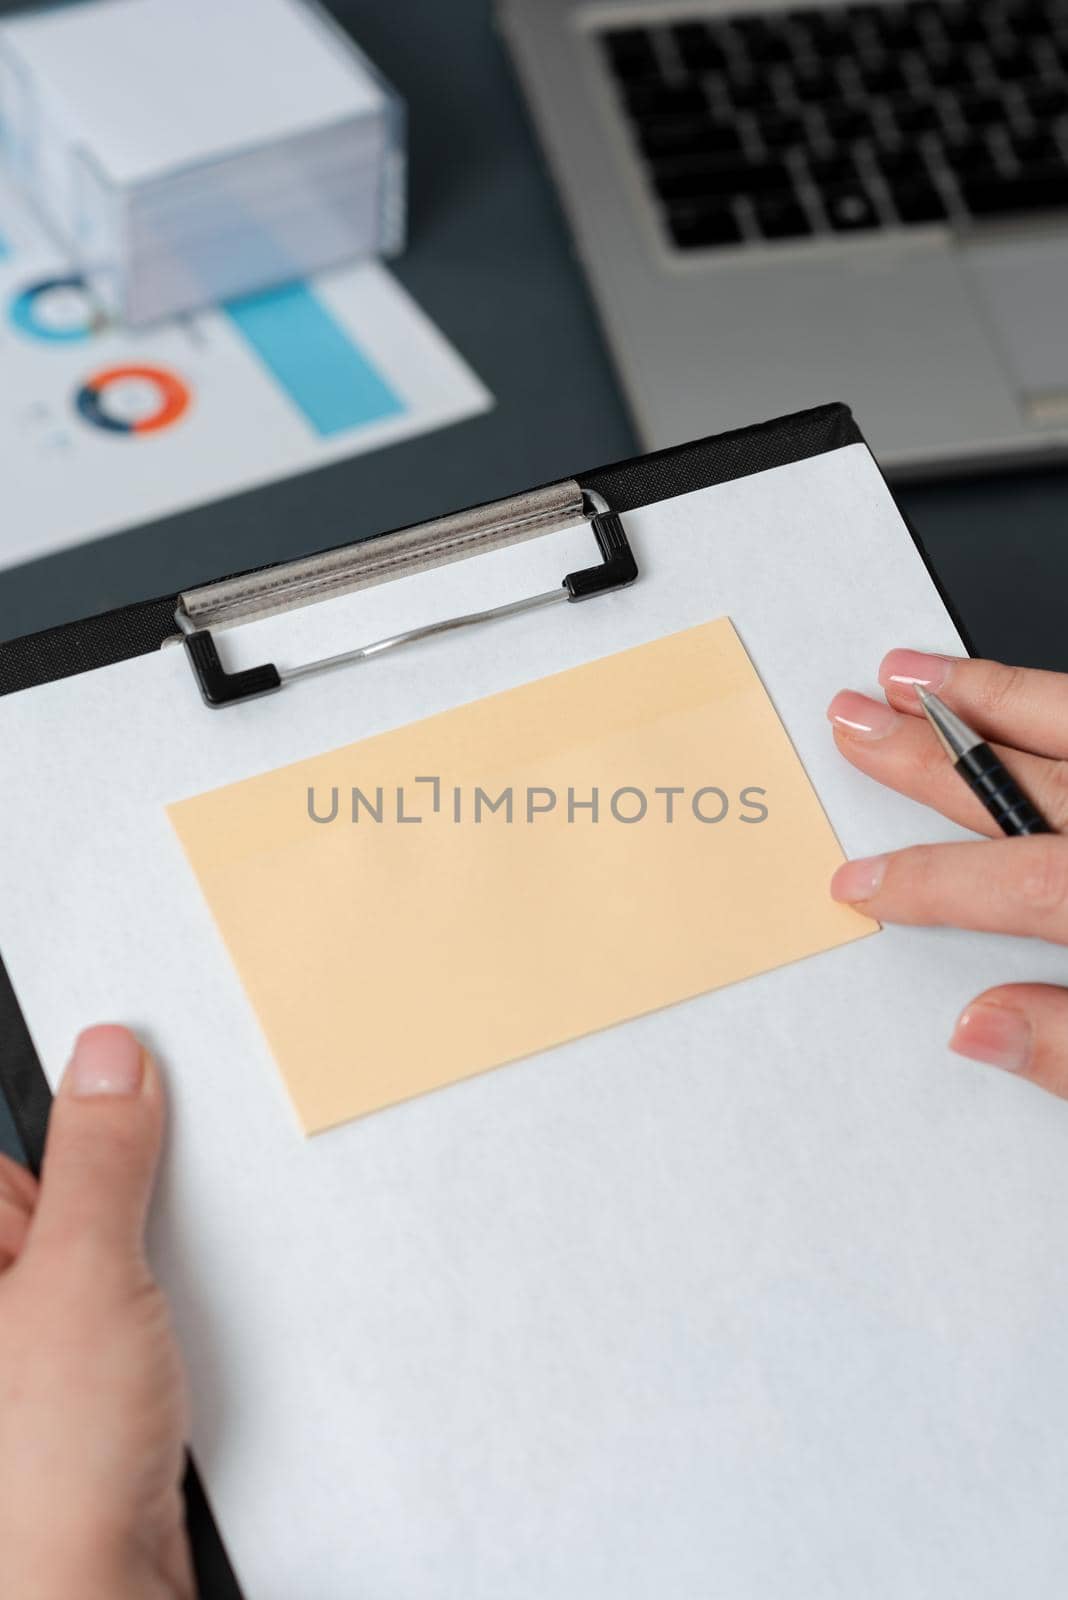 Businesswoman Holding Pen And Clipboard With Note On It With Important Messages. Woman Having Memo With Crutial Information. Executive Showing Critical Data On Paper. by nialowwa